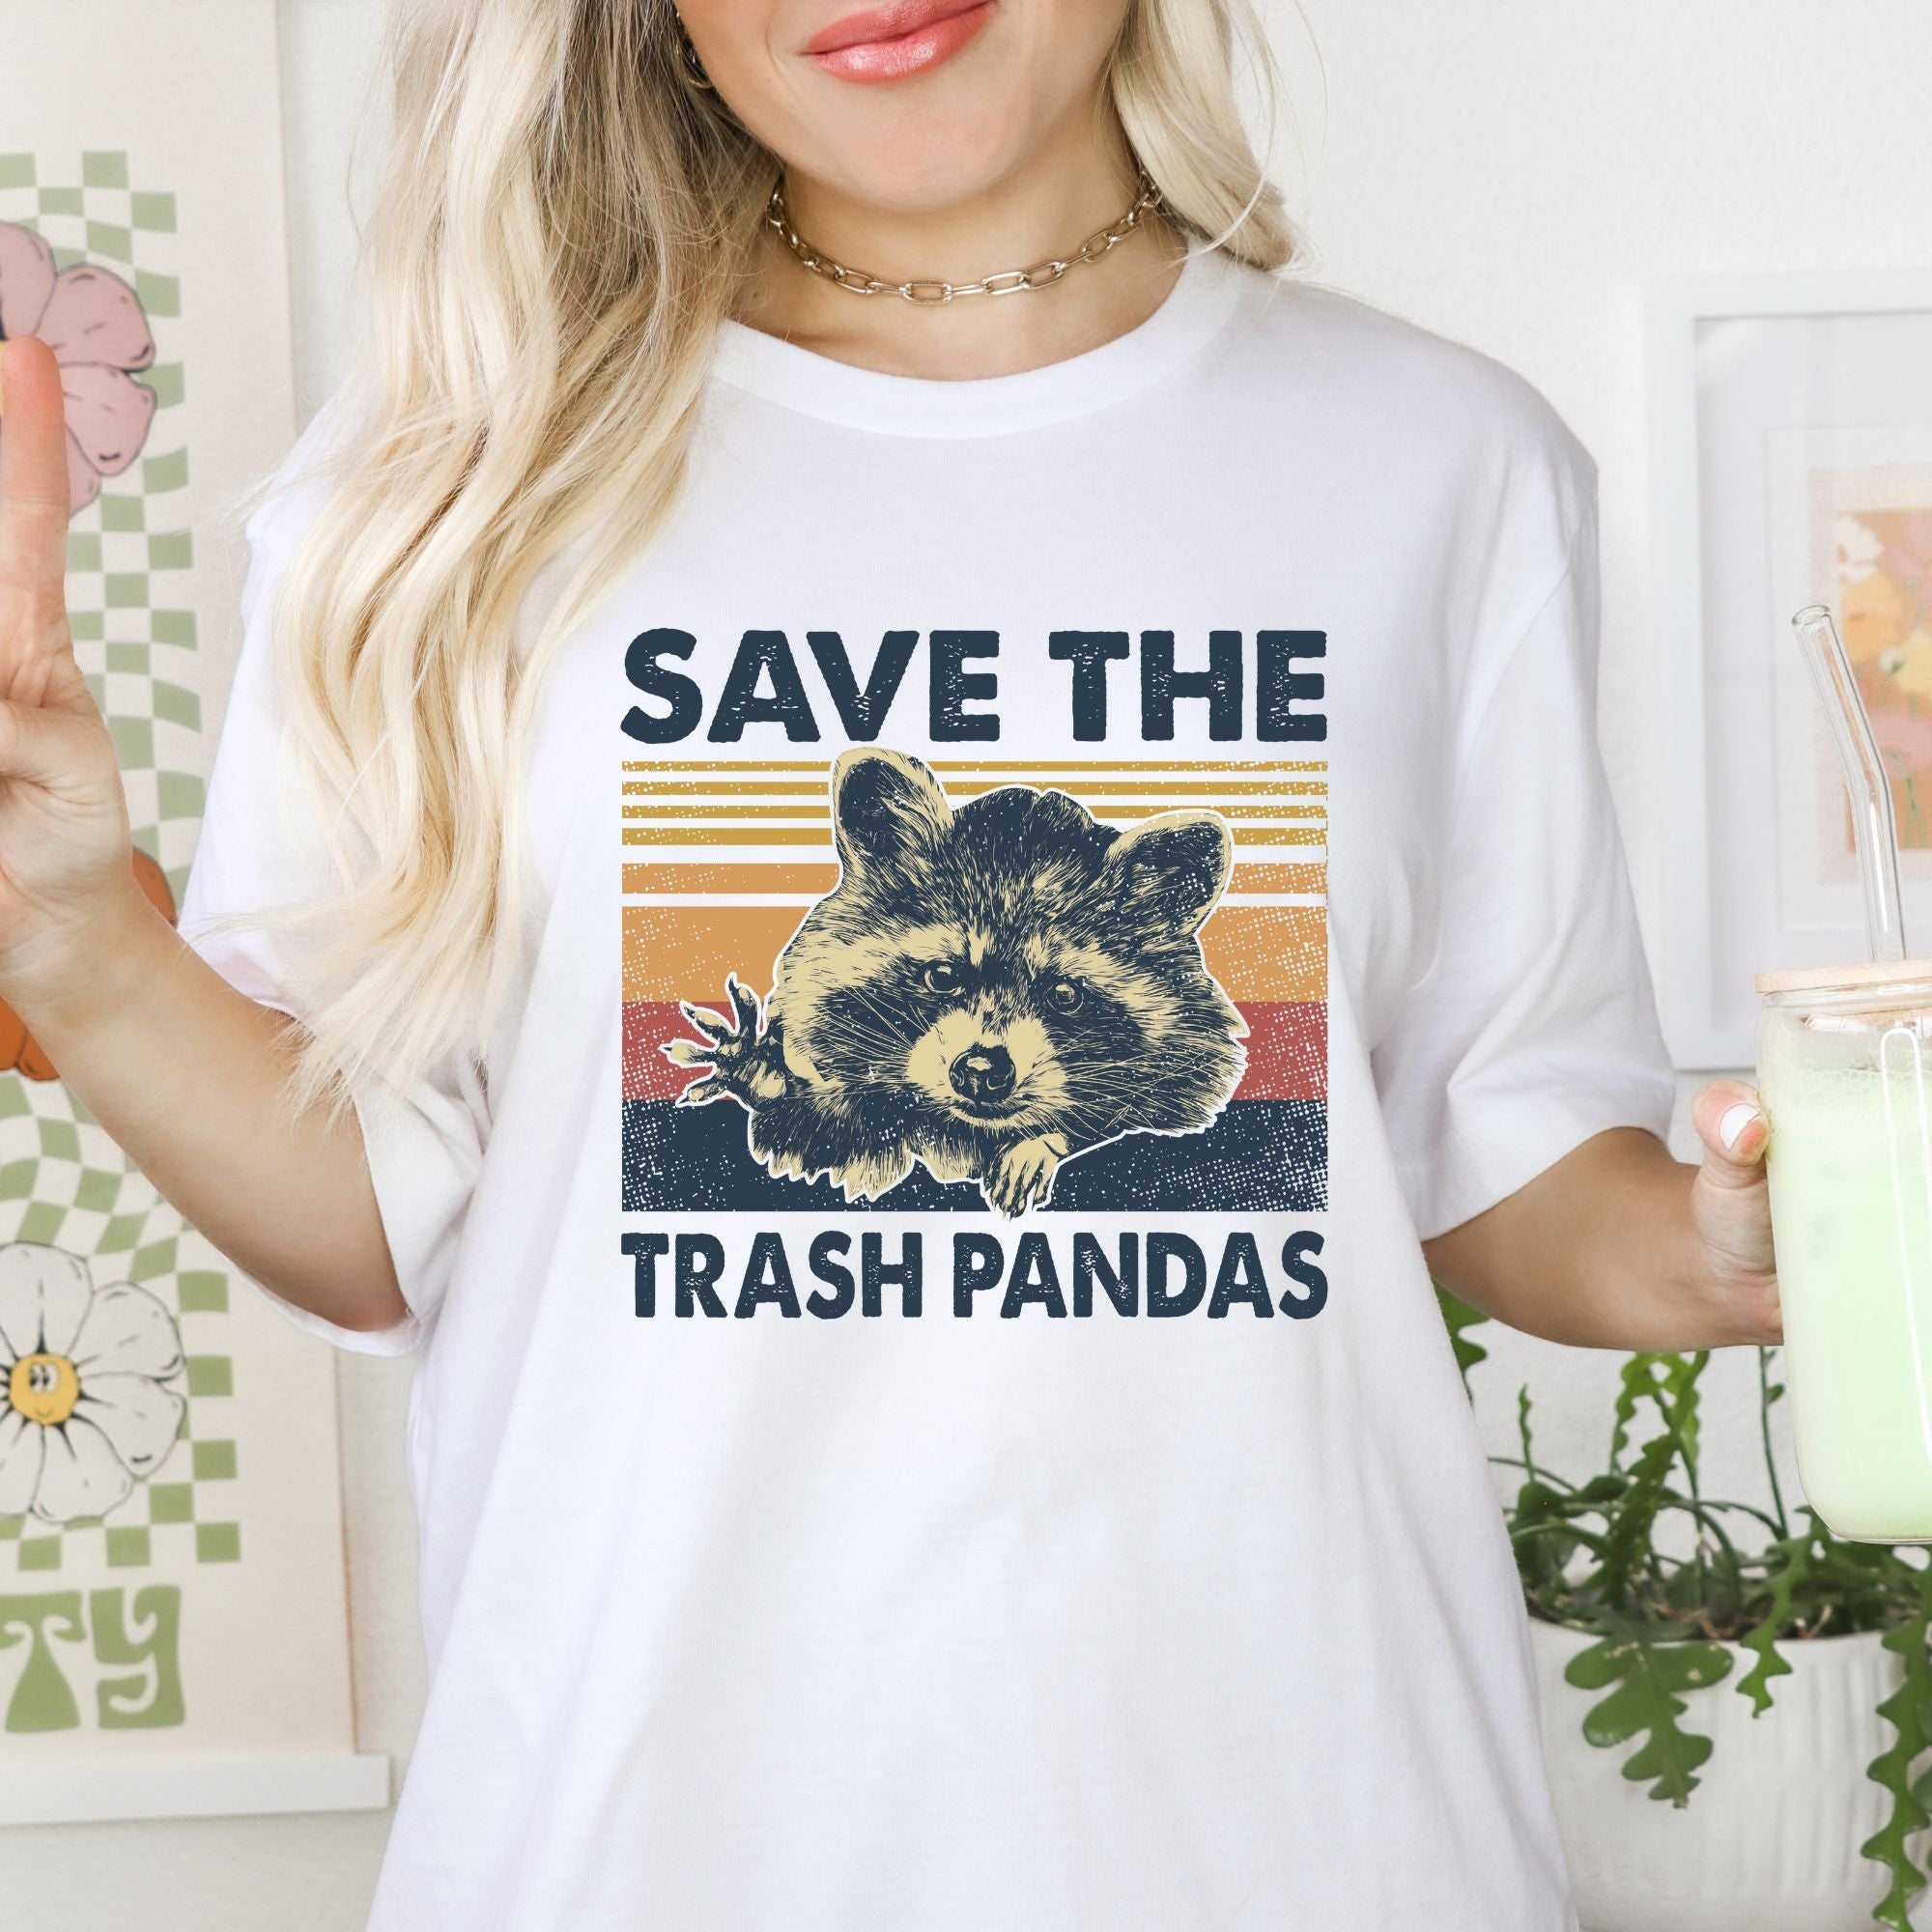 Save The Trash Pandas Funny Racoon Graphic Tee *UNISEX FIT*-Graphic Tees-208 Tees Wholesale, Idaho